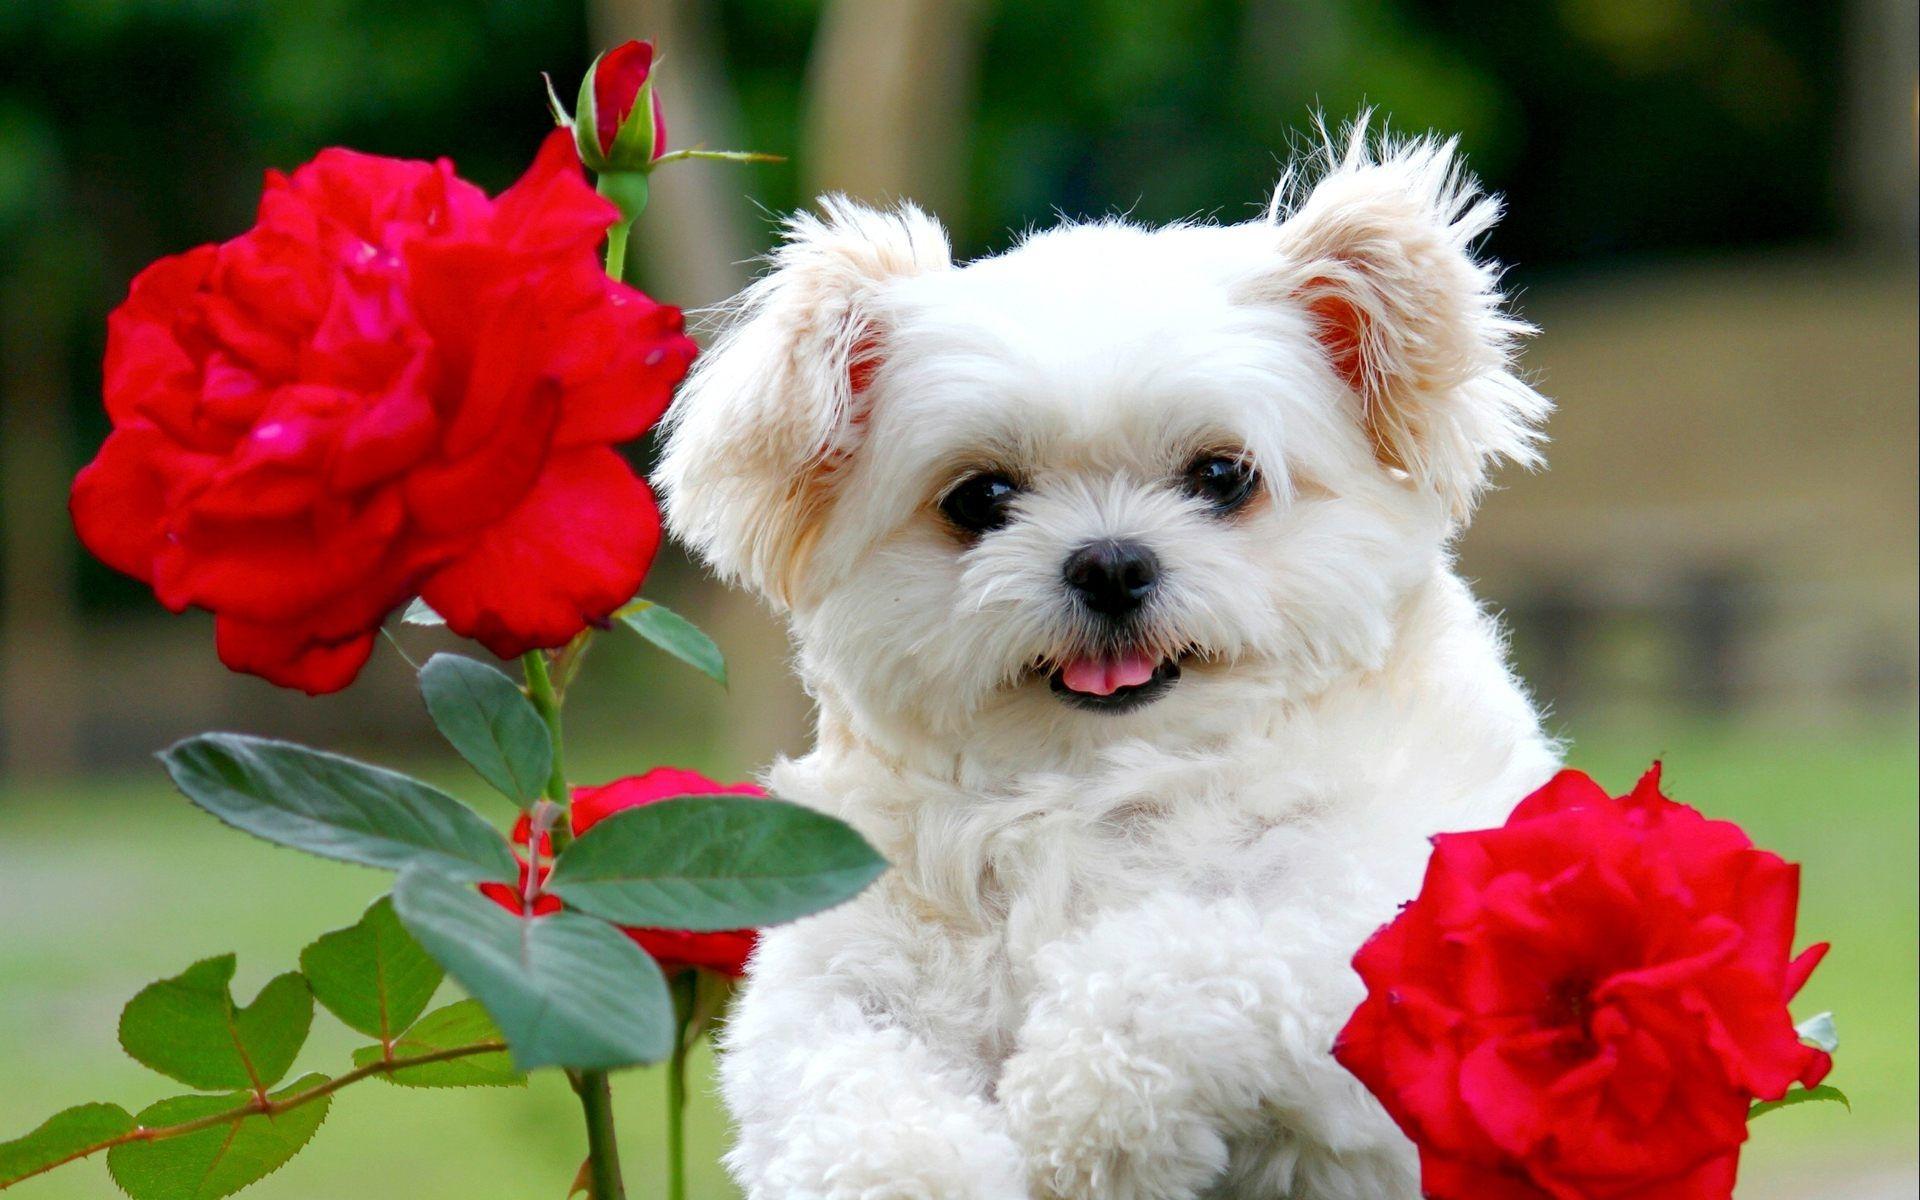 Puppy And Flowers Wallpapers - Wallpaper Cave